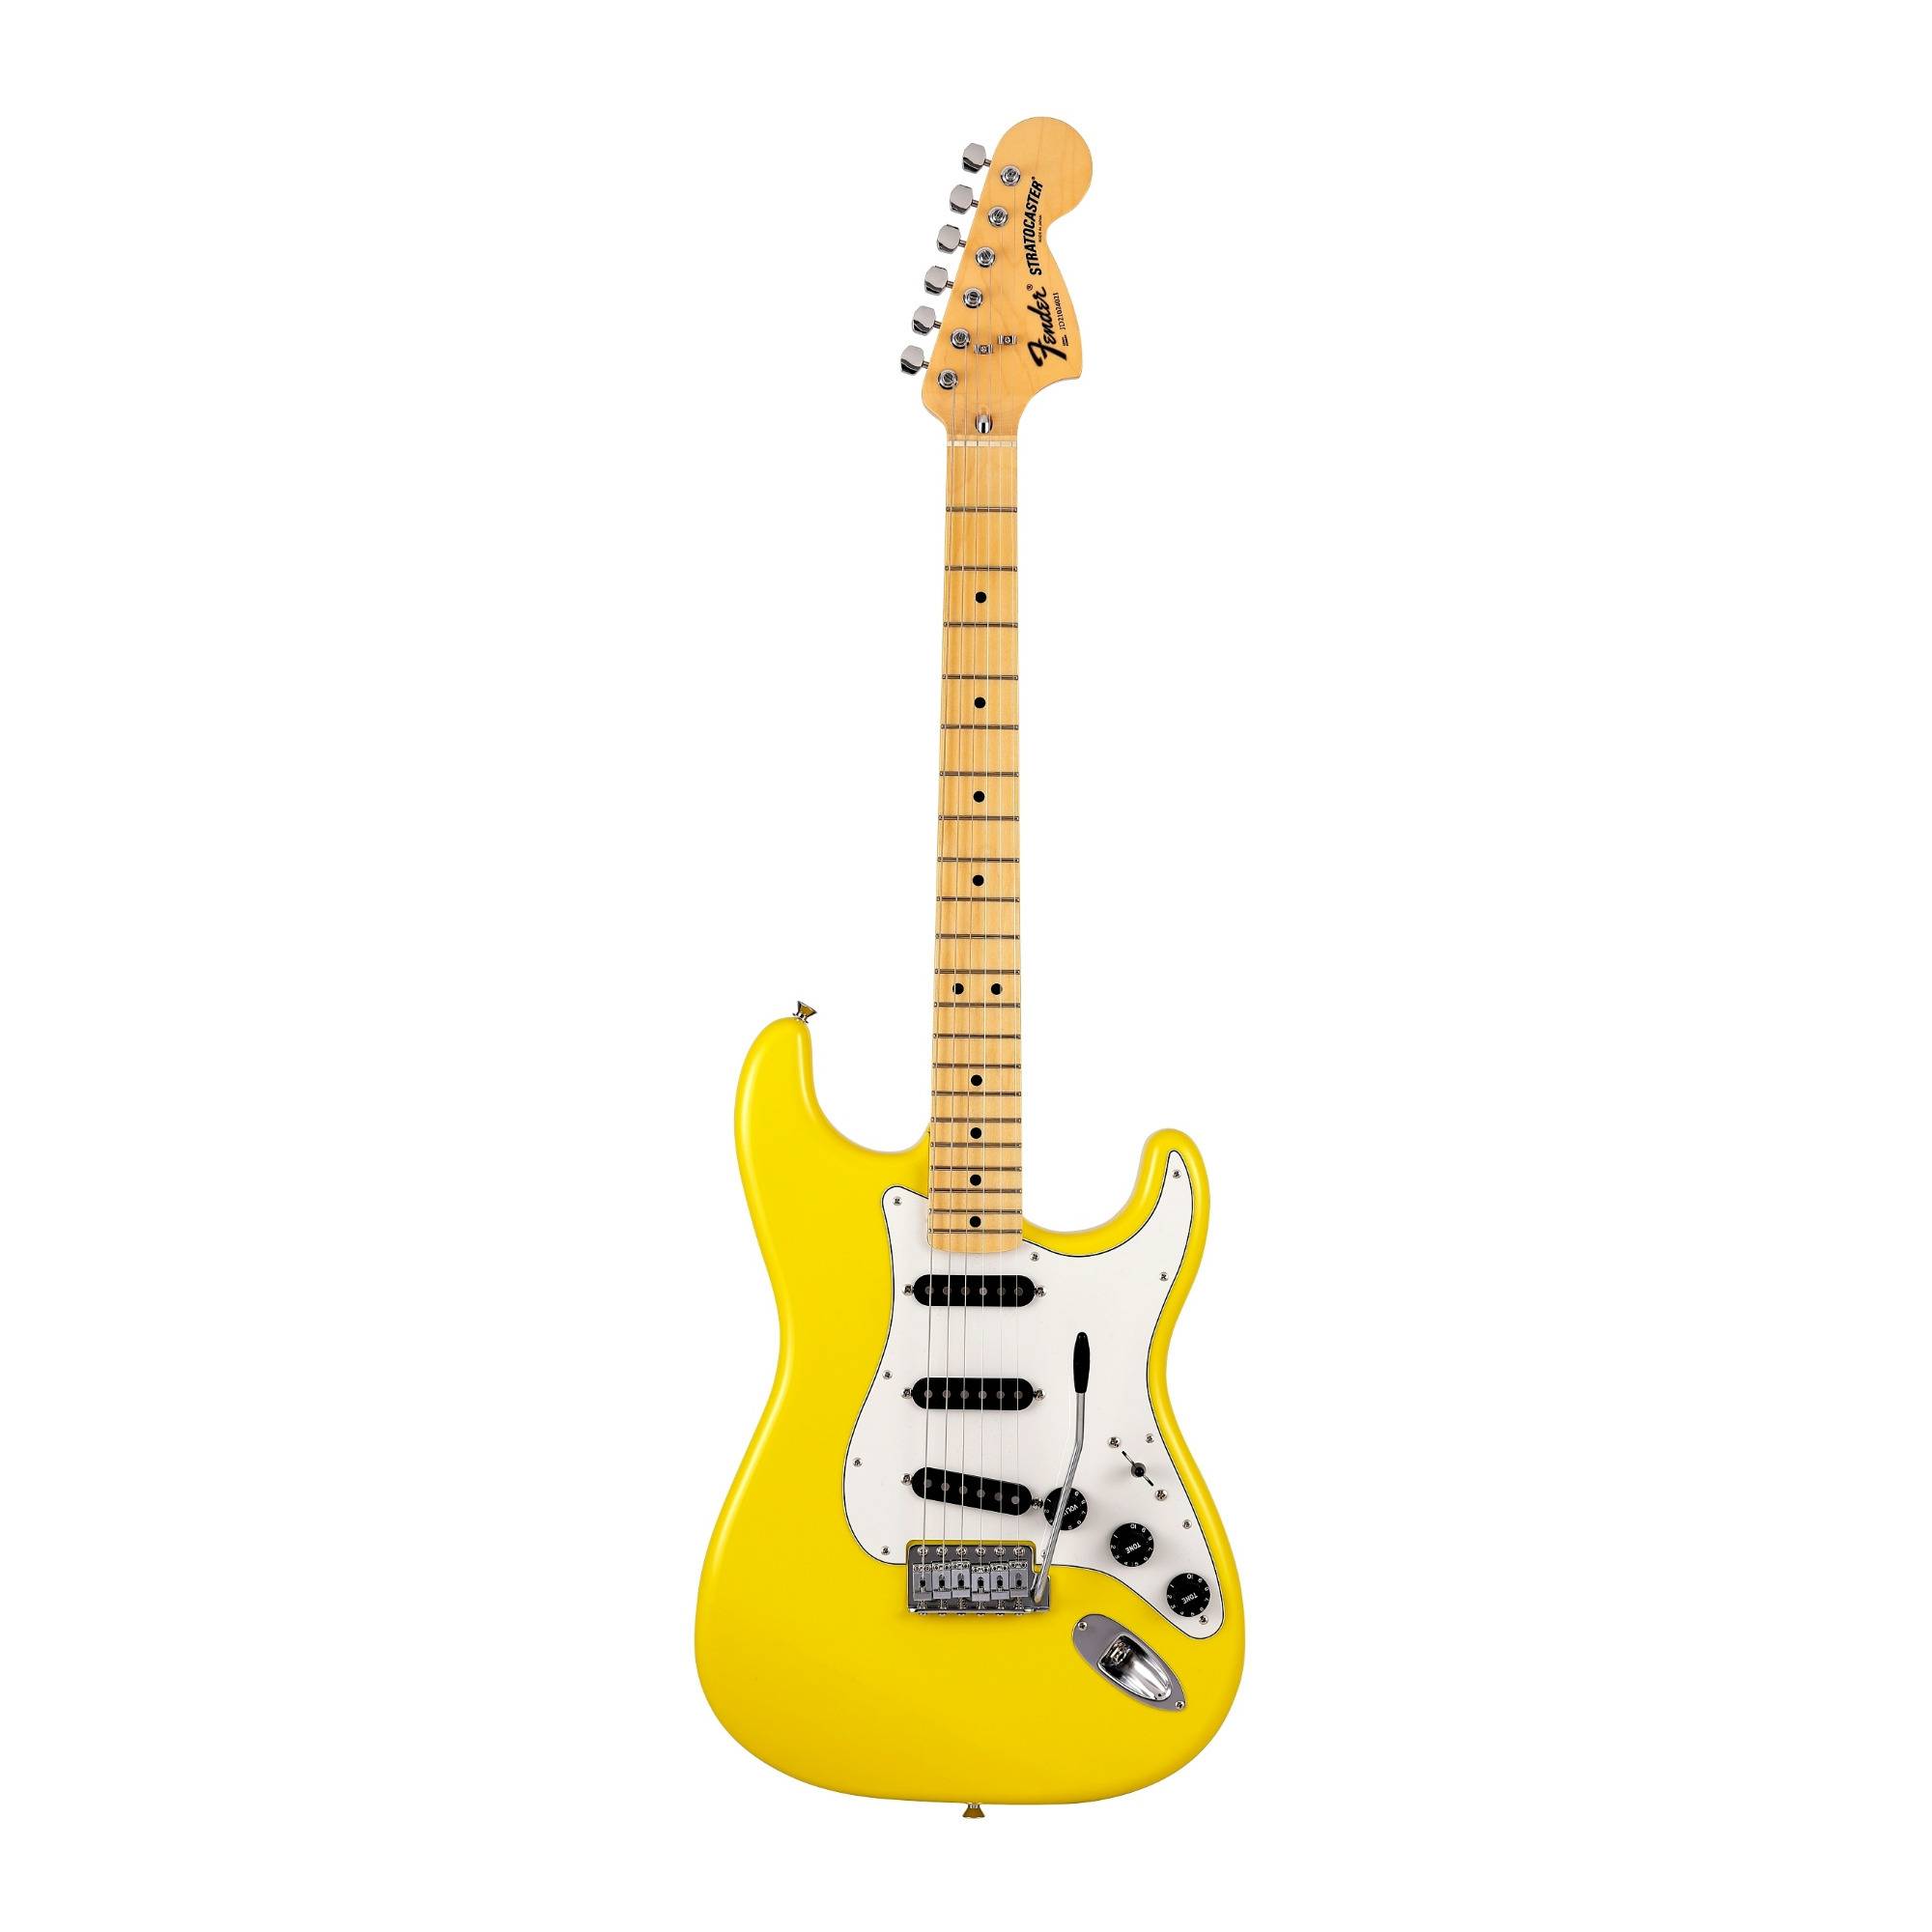 Fender Made in Japan Limited International Color Stratocaster Guitar with U Neck (Monaco Yellow)